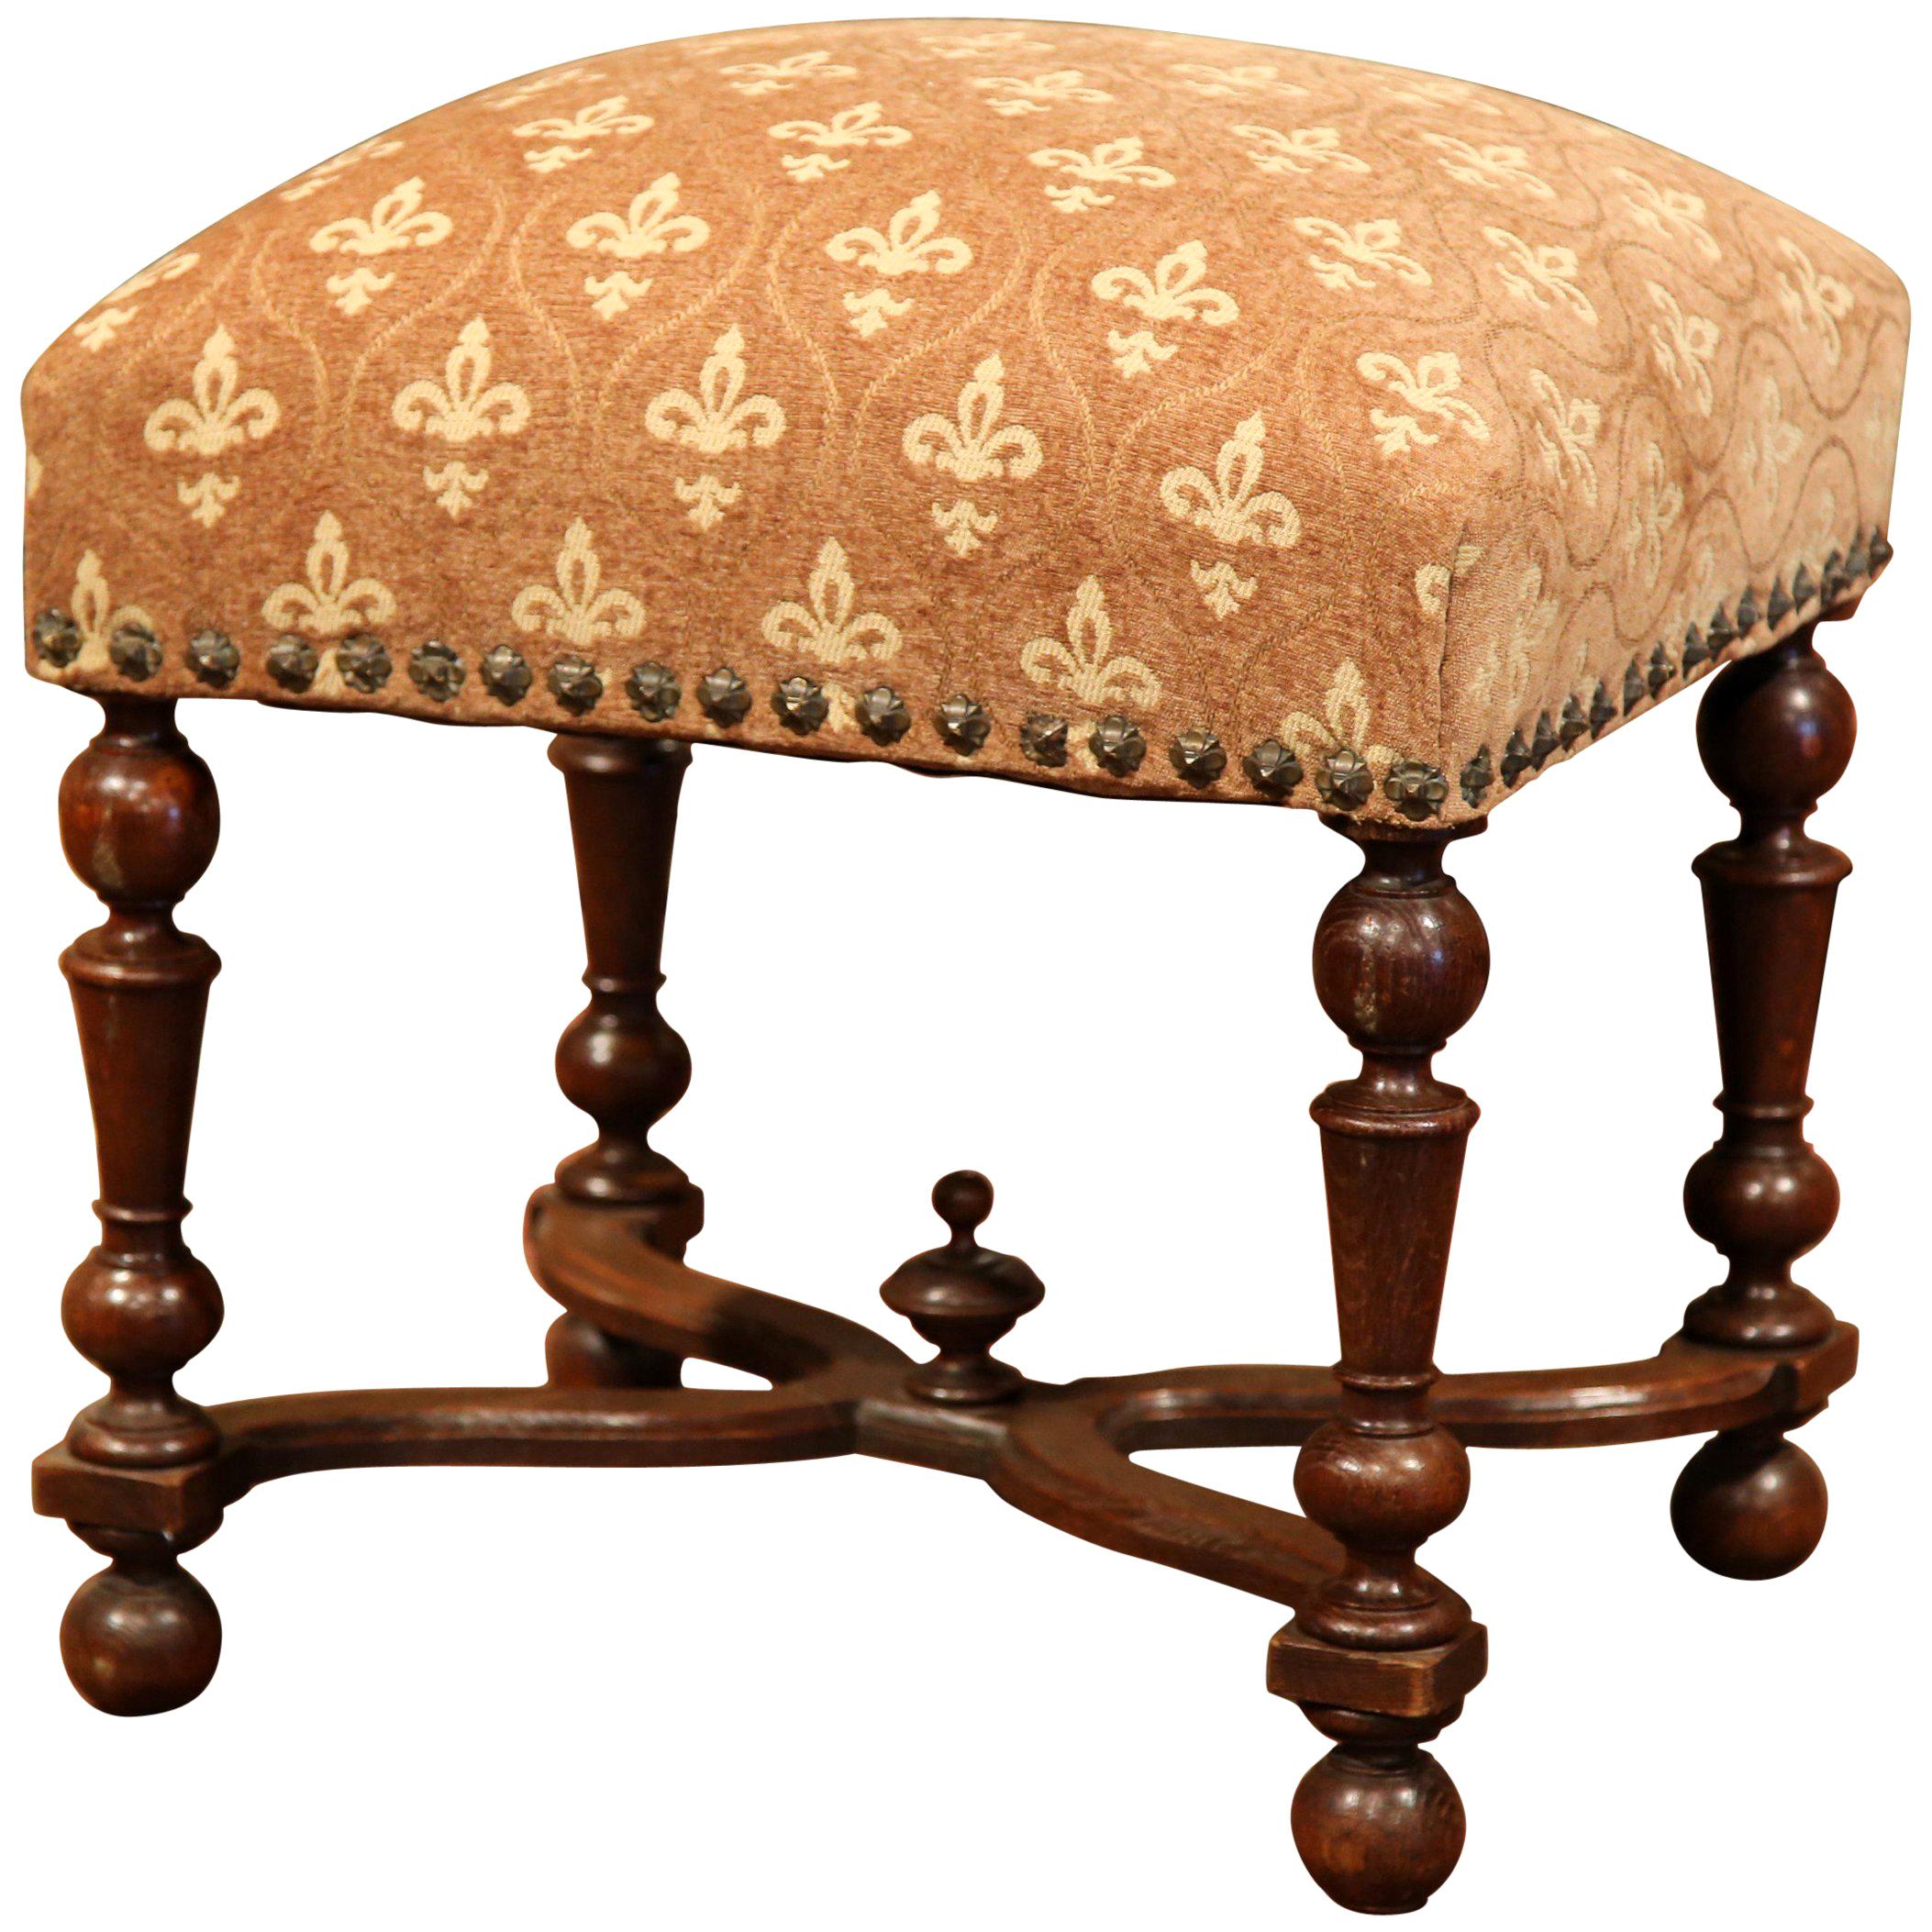 19th Century French Louis III Carved Walnut Stool with Fleur-de-Lys Fabric